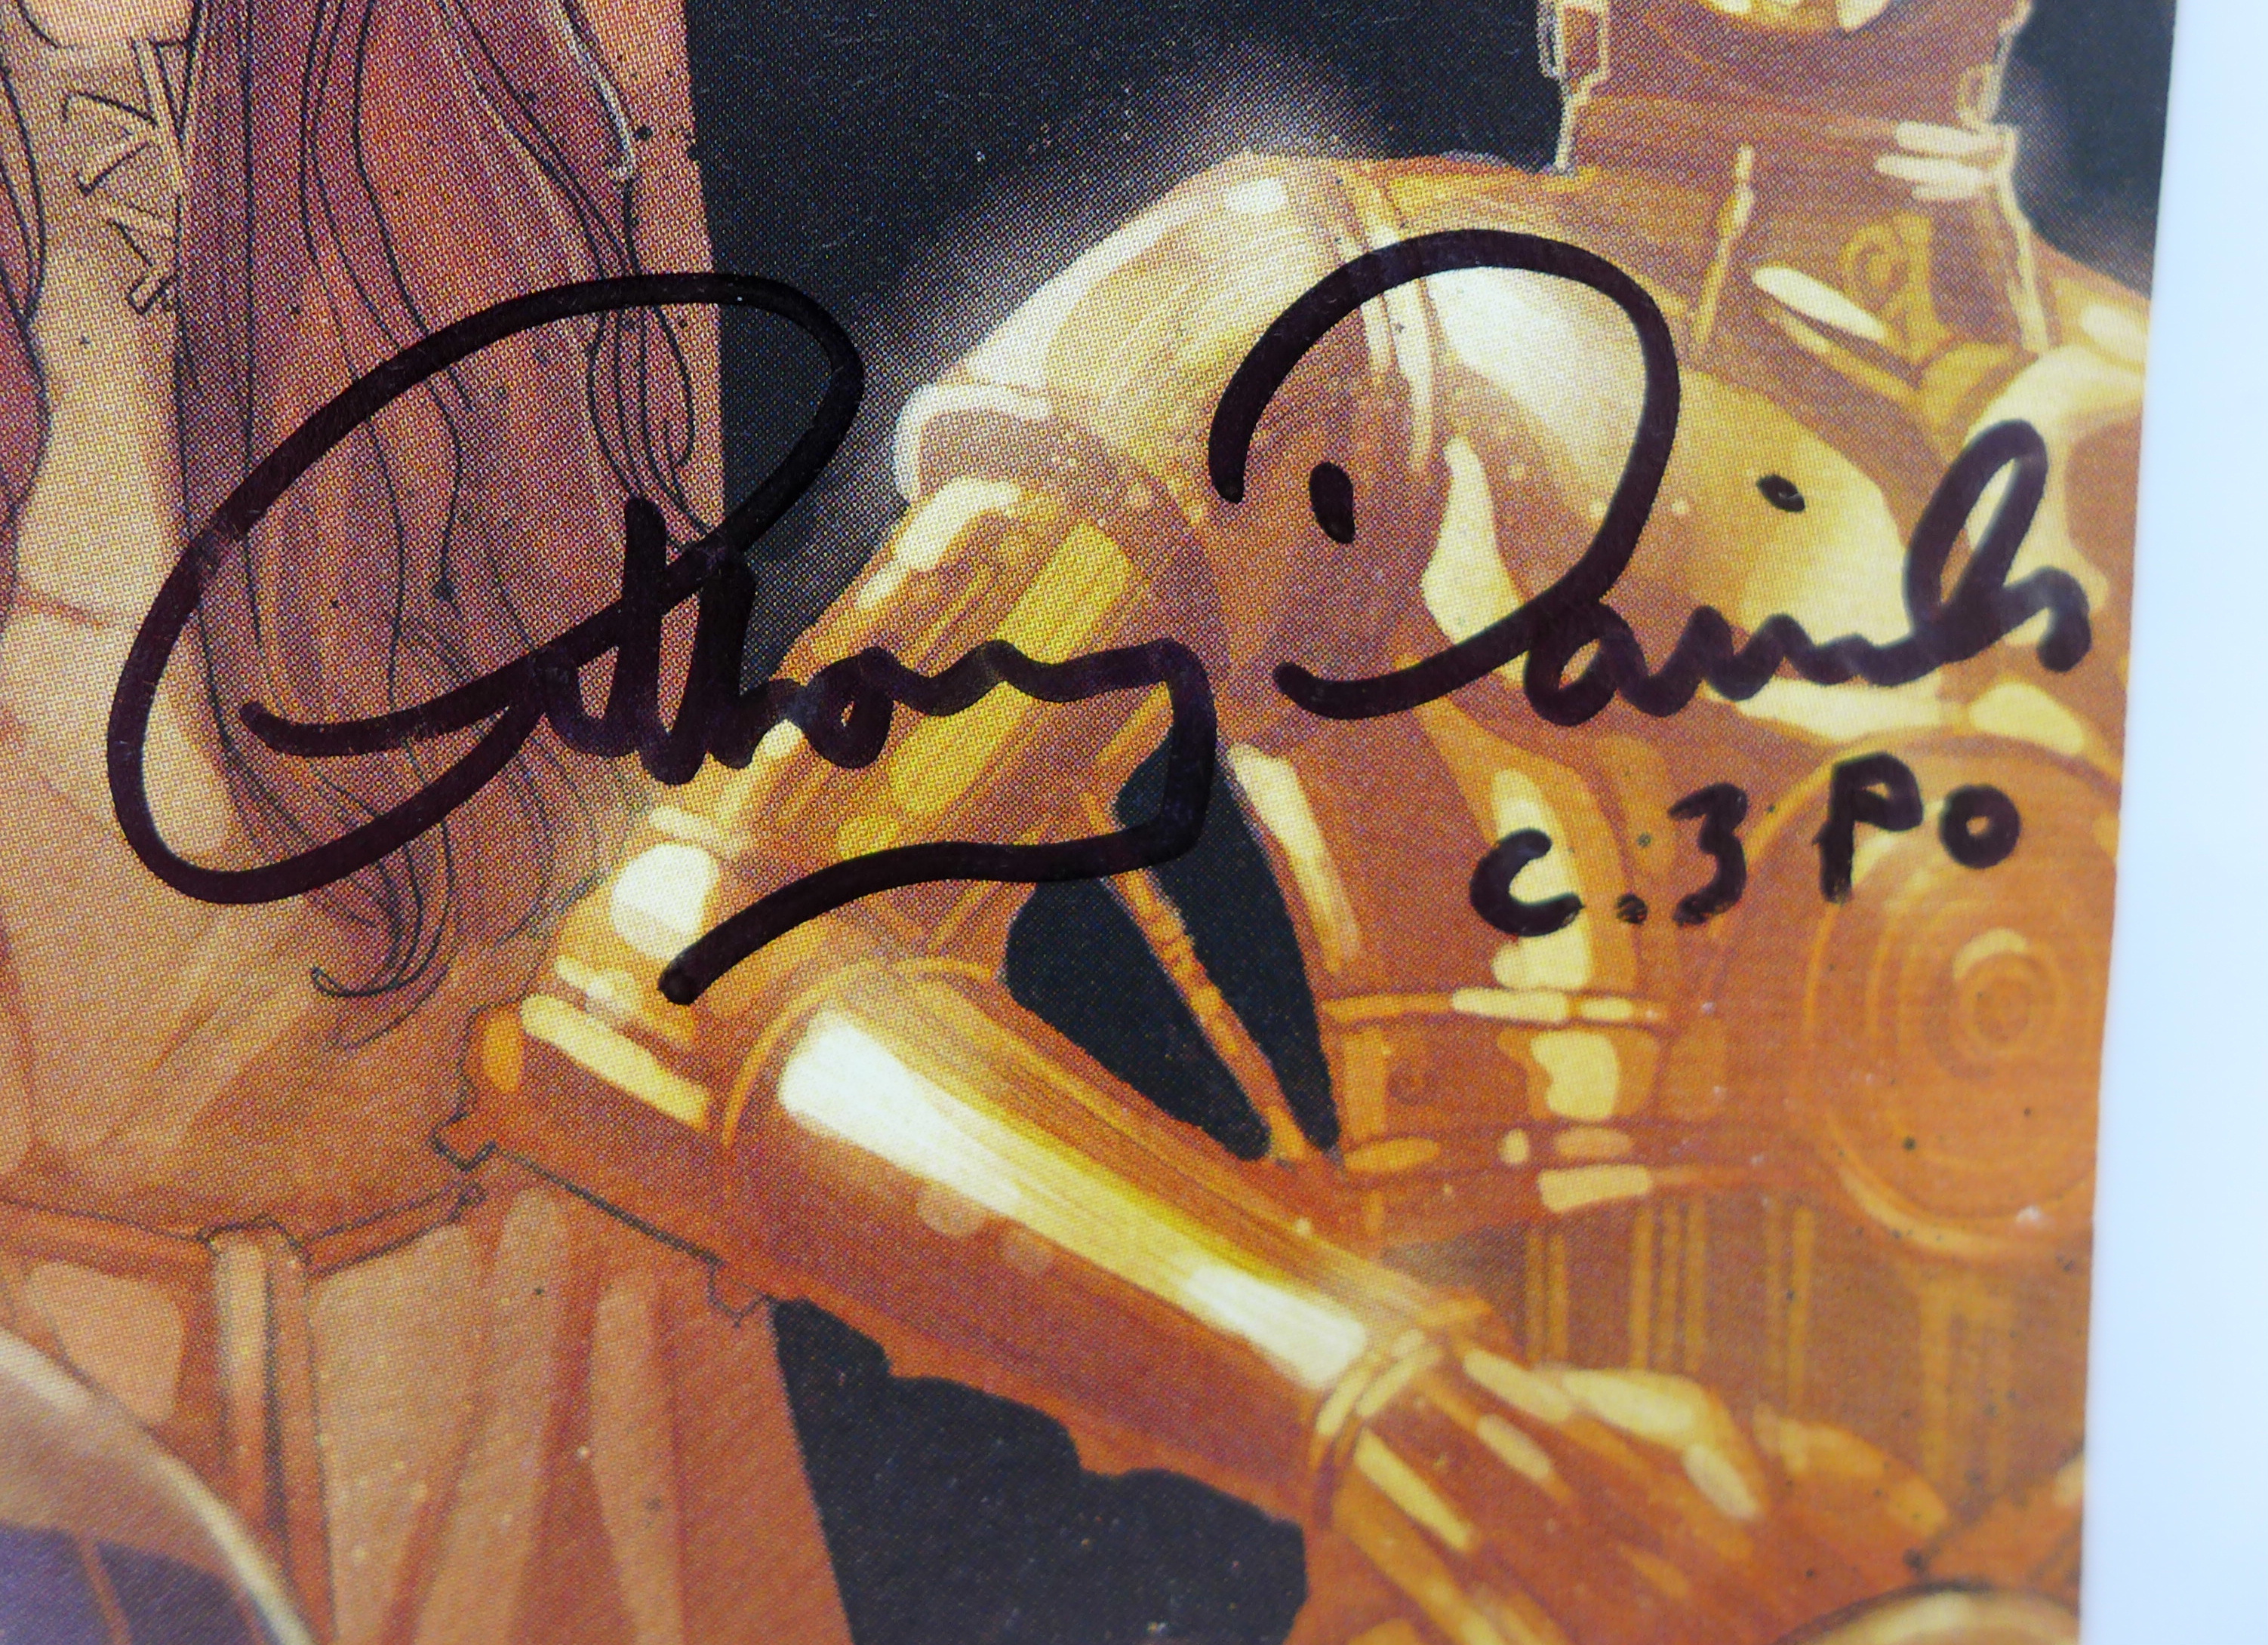 A Star Wars comic signed by Kenny Baker (R2D2) and Anthony Daniels (C3PO) - Image 2 of 3